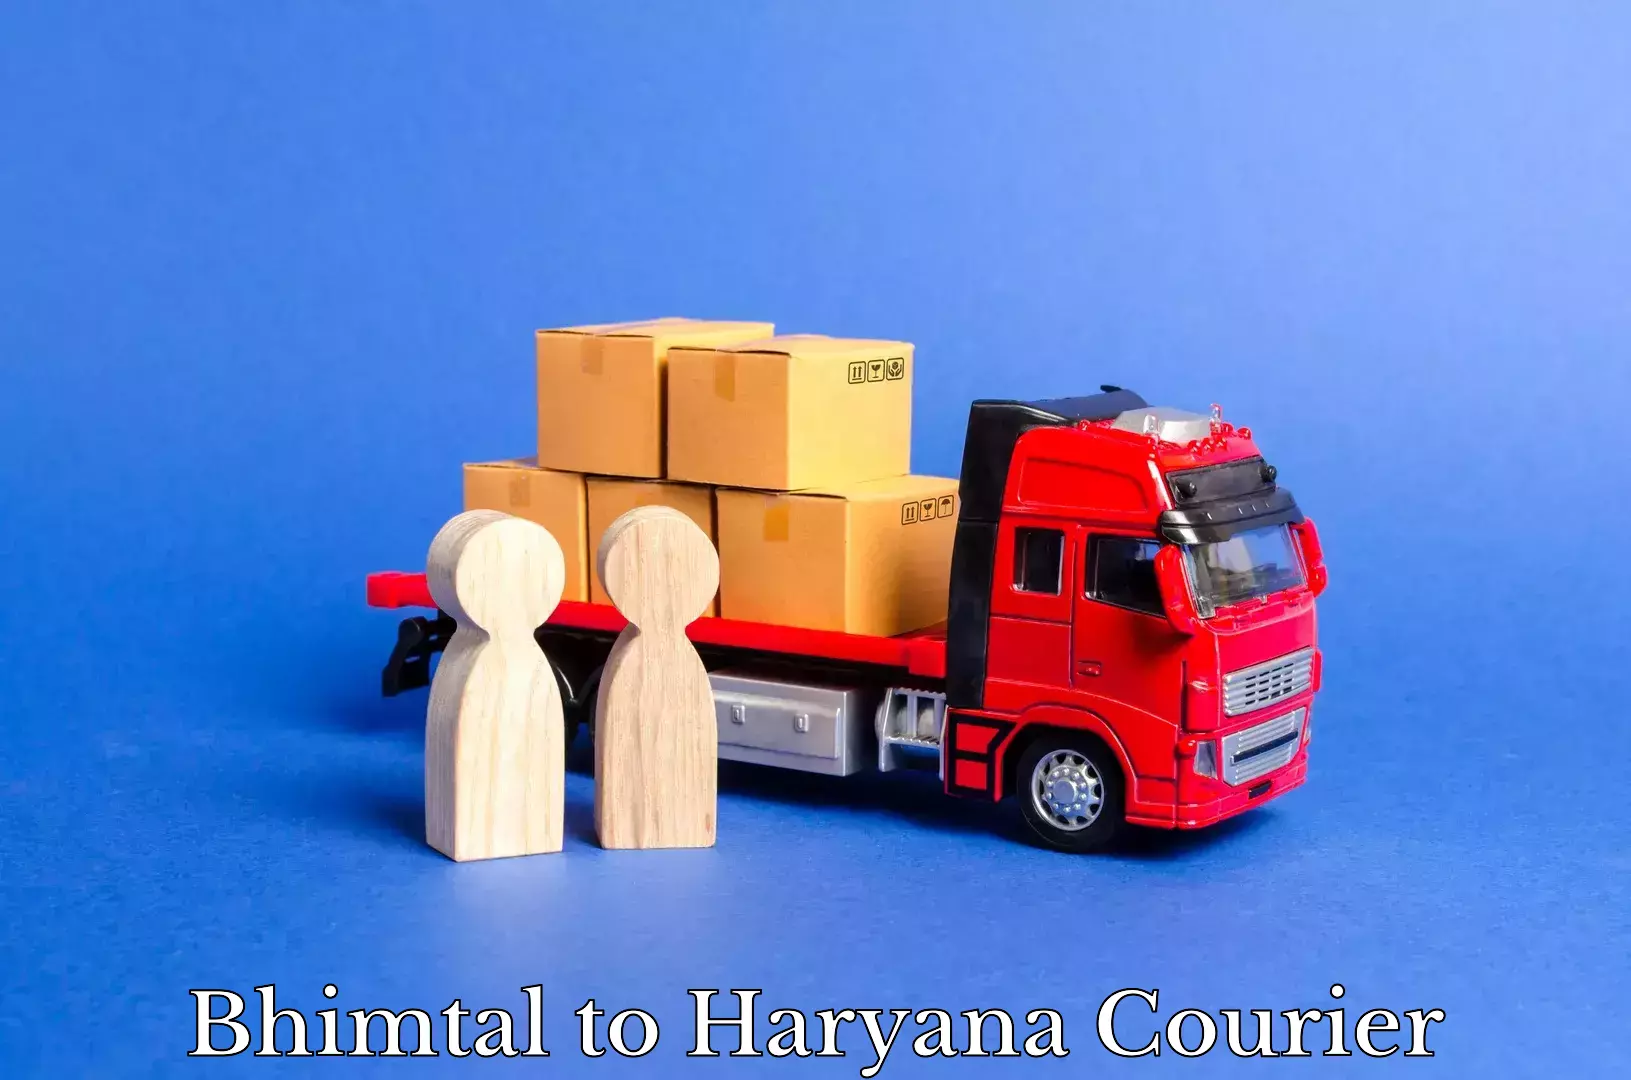 Cash on delivery service Bhimtal to Haryana